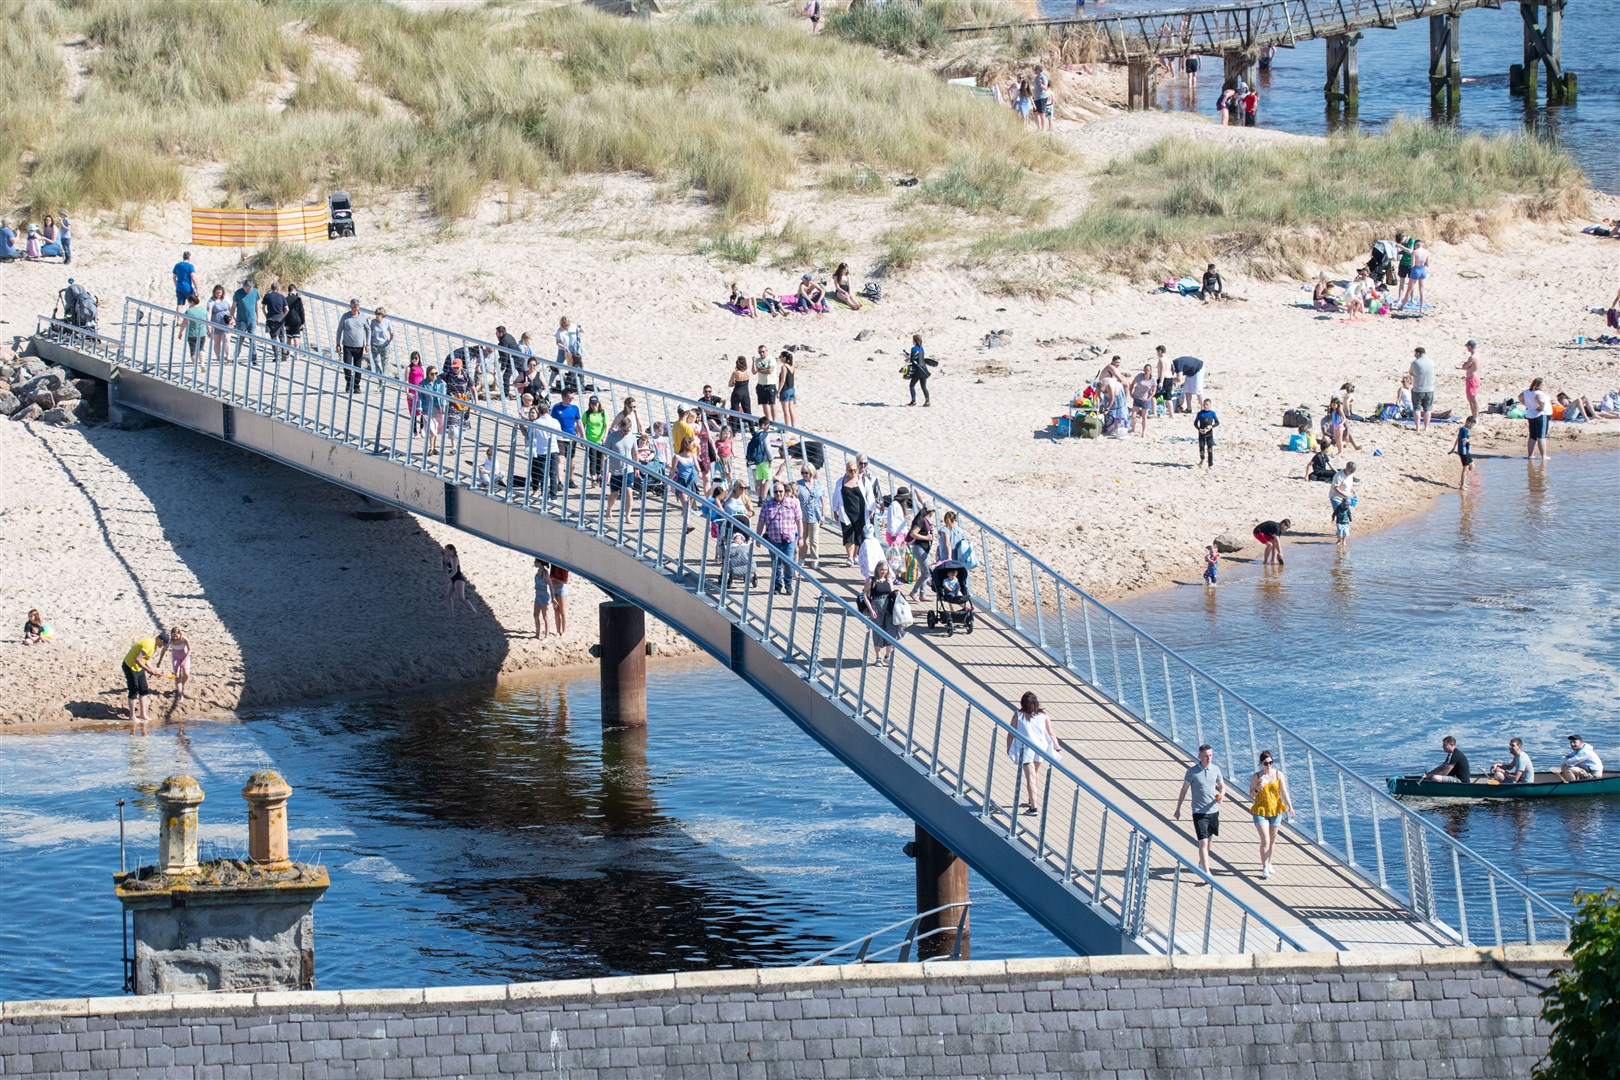 The new bridge opened on Tuesday, May 31 and has been a magnet for visitors since. Picture: Daniel Forsyth